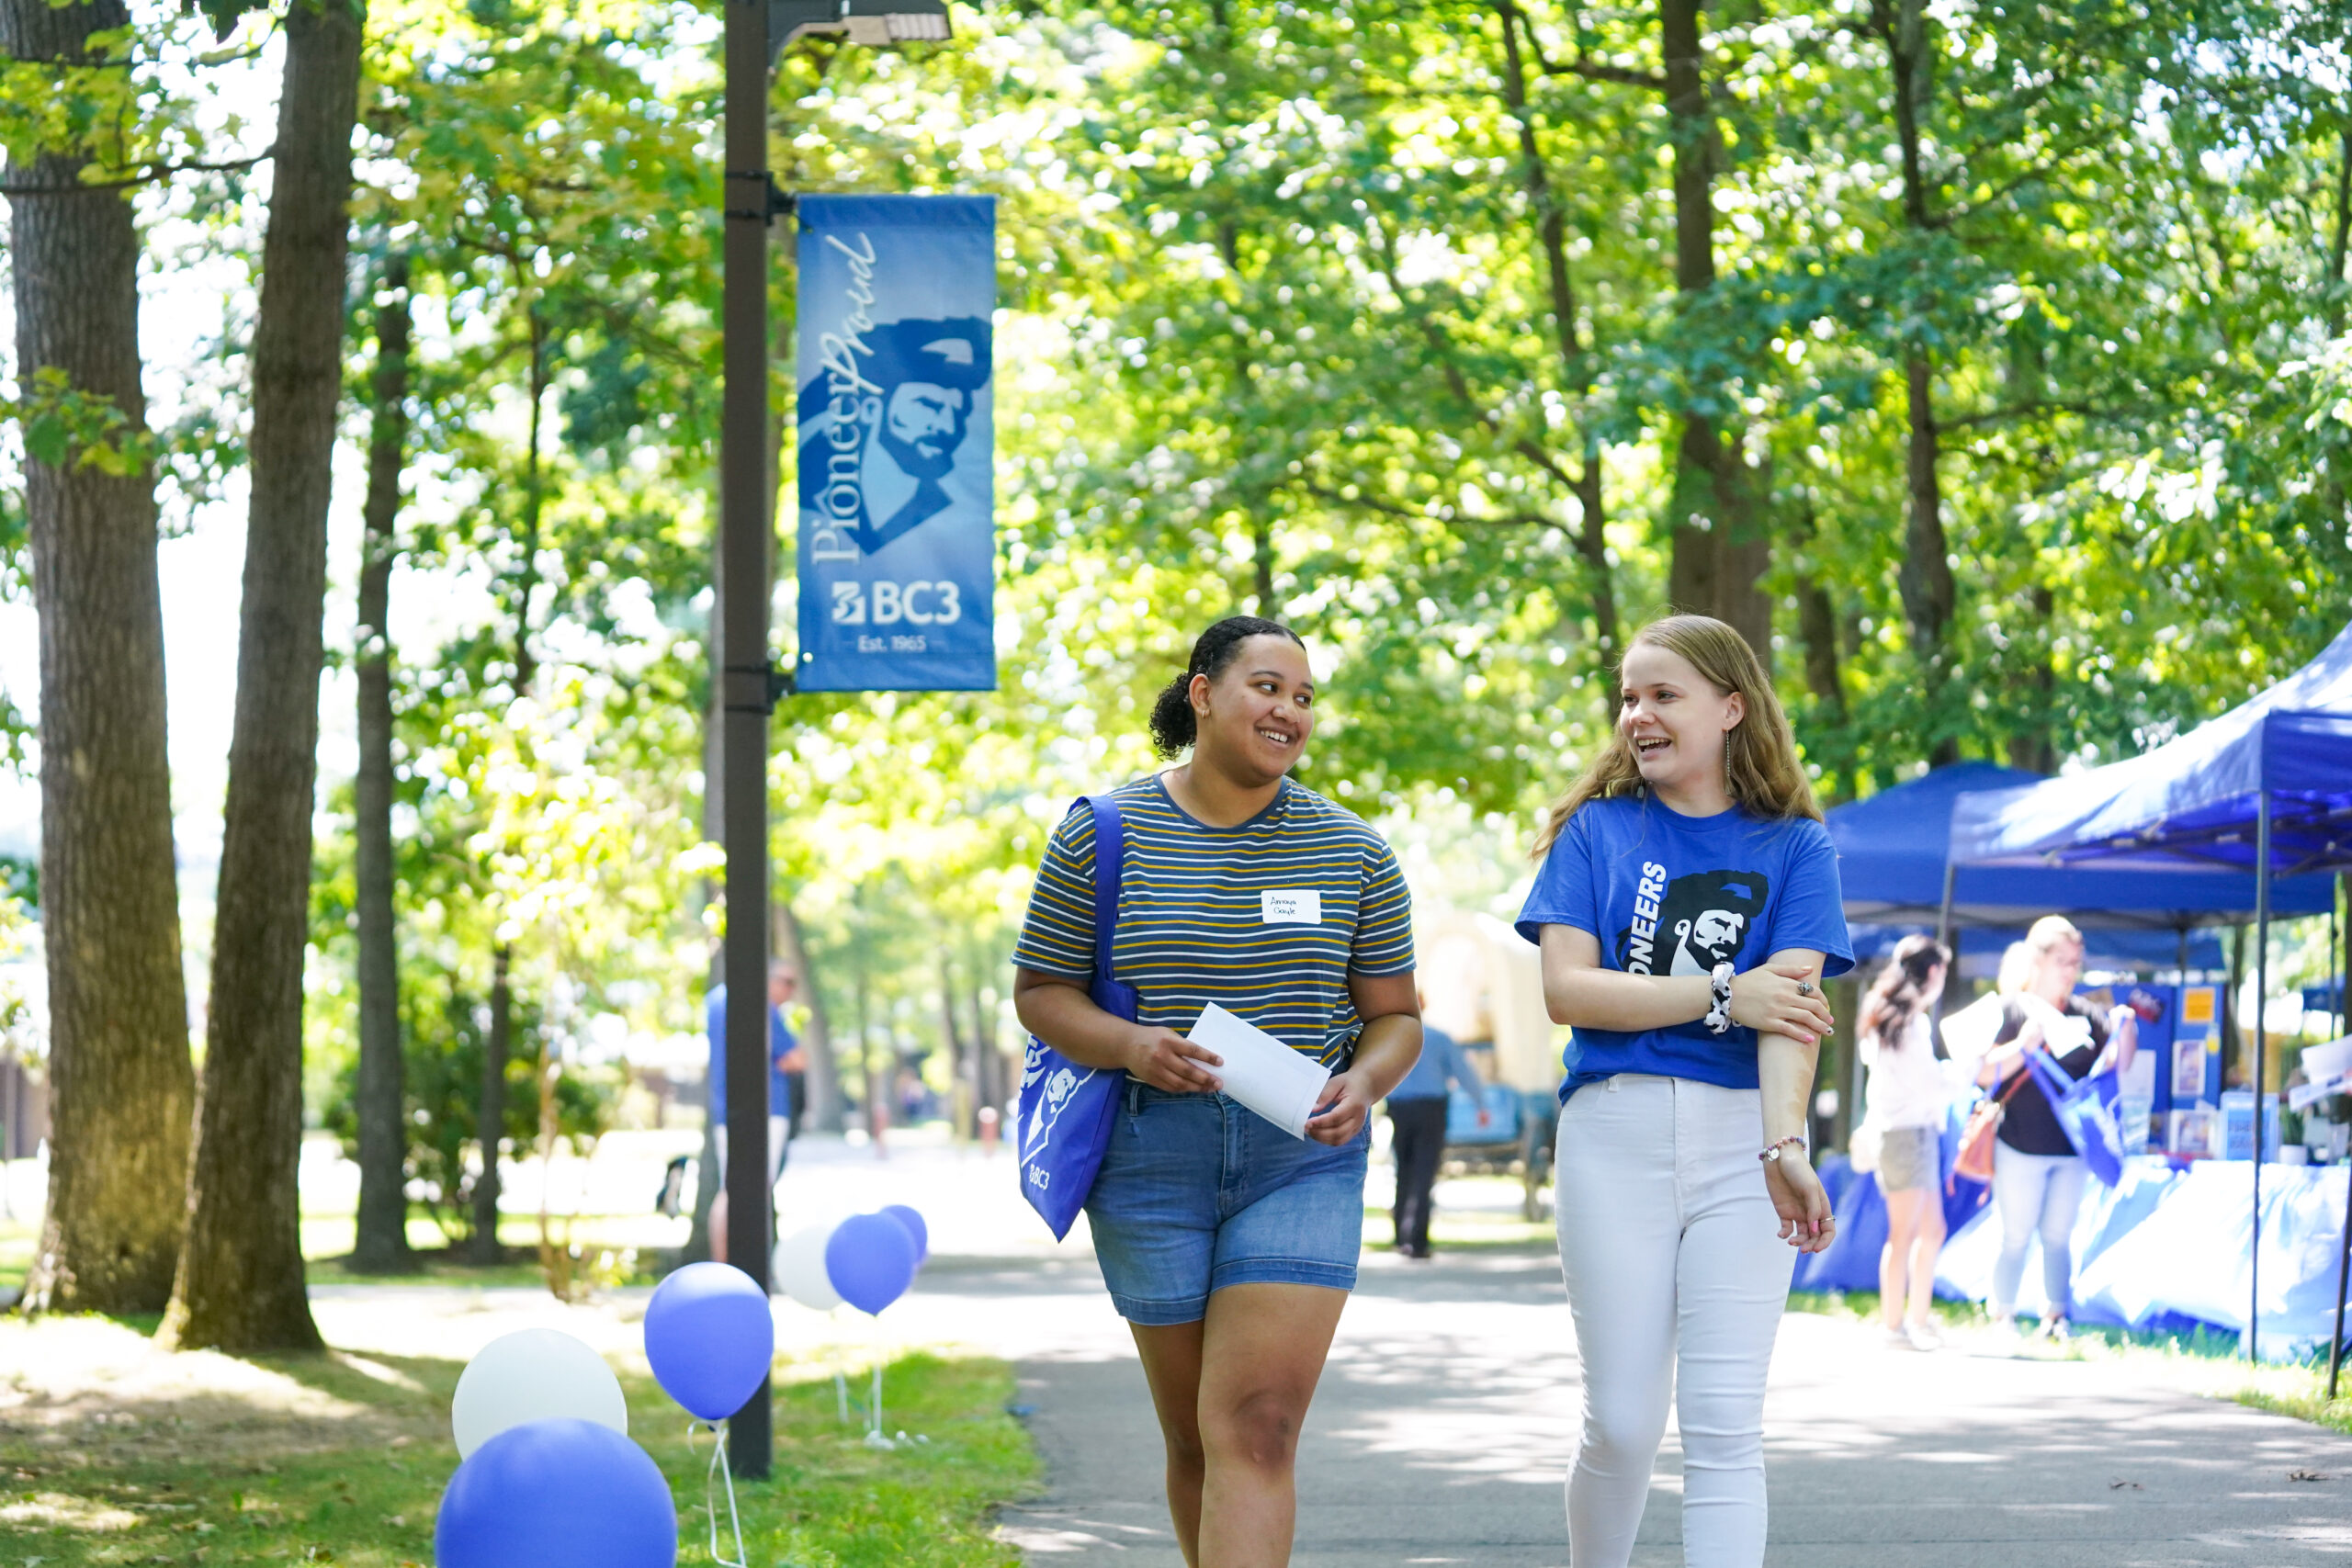 BC3 Main Campus will hold an open house from 5 p.m. to 7 p.m. Oct. 25 at 107 College Dr., Butler, PA 16002. A nursing information session will be held at 5:30 p.m.